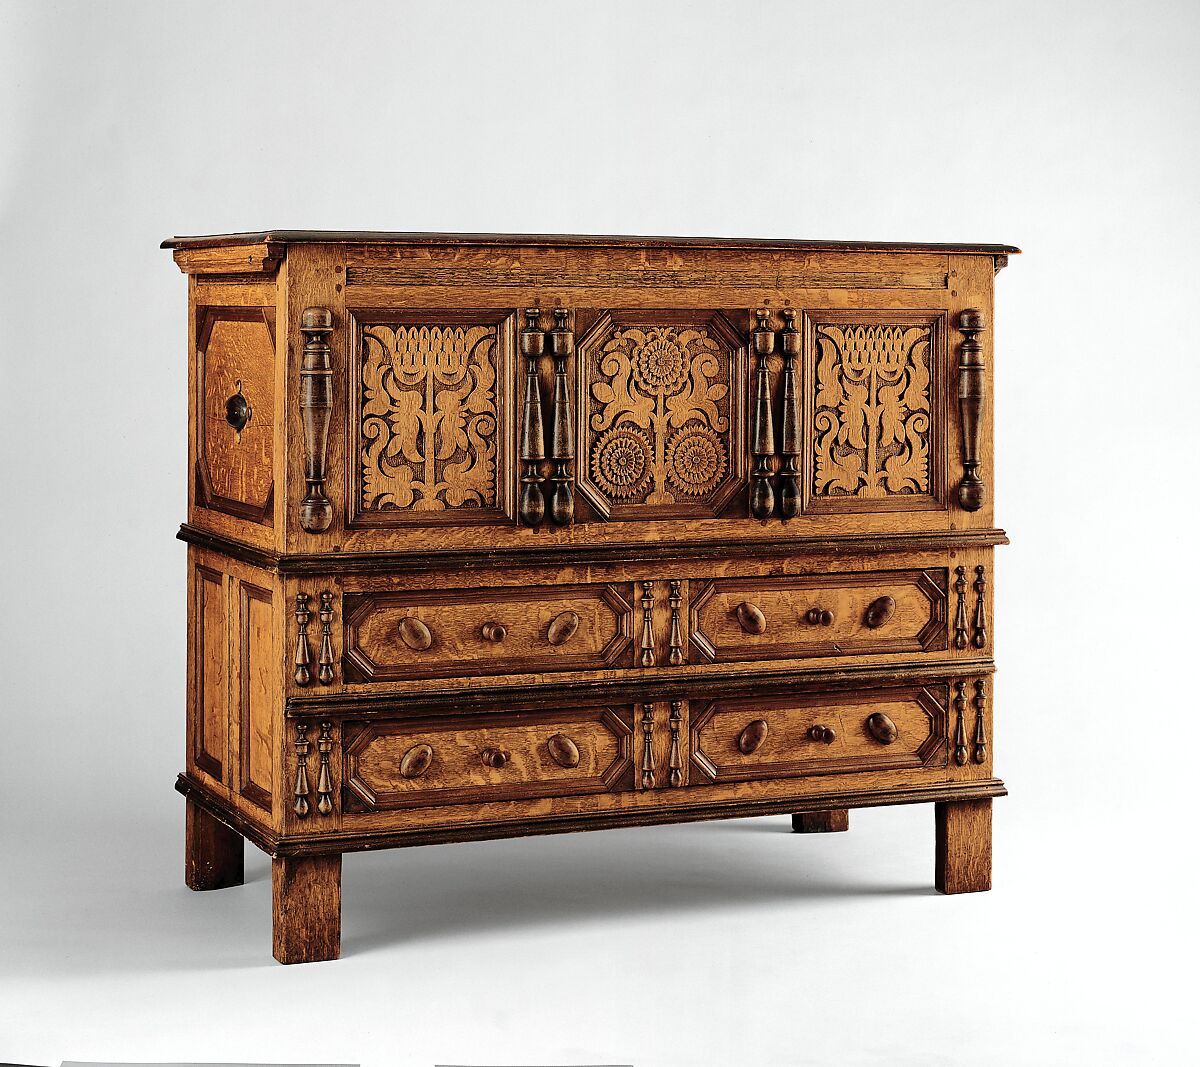 Chest with Drawers, Workshop of Peter Blin (ca. 1675–1725), Oak, pine, maple, American 